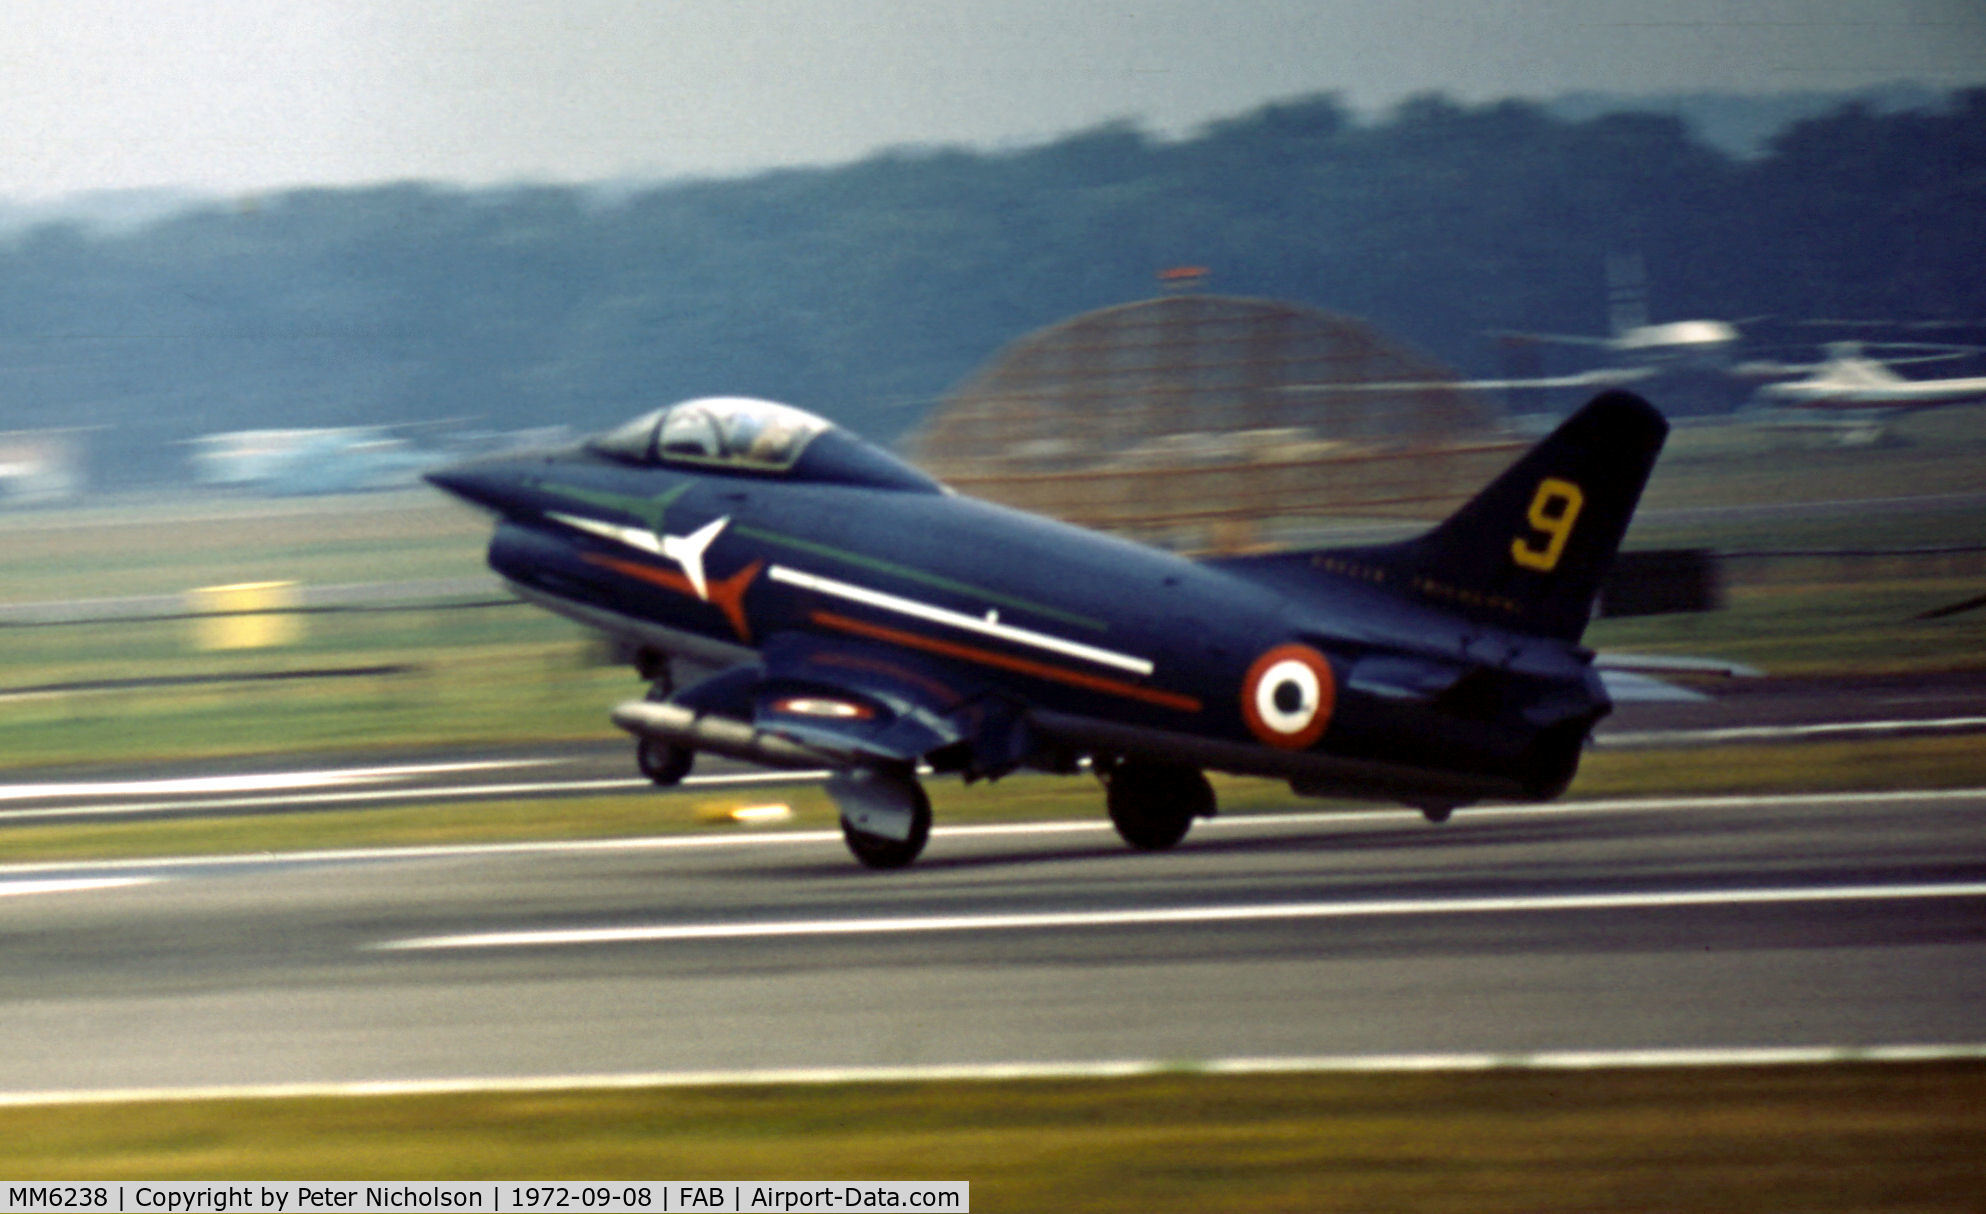 MM6238, Fiat G-91PAN C/N 4, Fiat G-91PAN number 9 of the Italian Air Force's Frecce Tricolori flight demonstration team in action at the 1972 Farnborough Airshow.